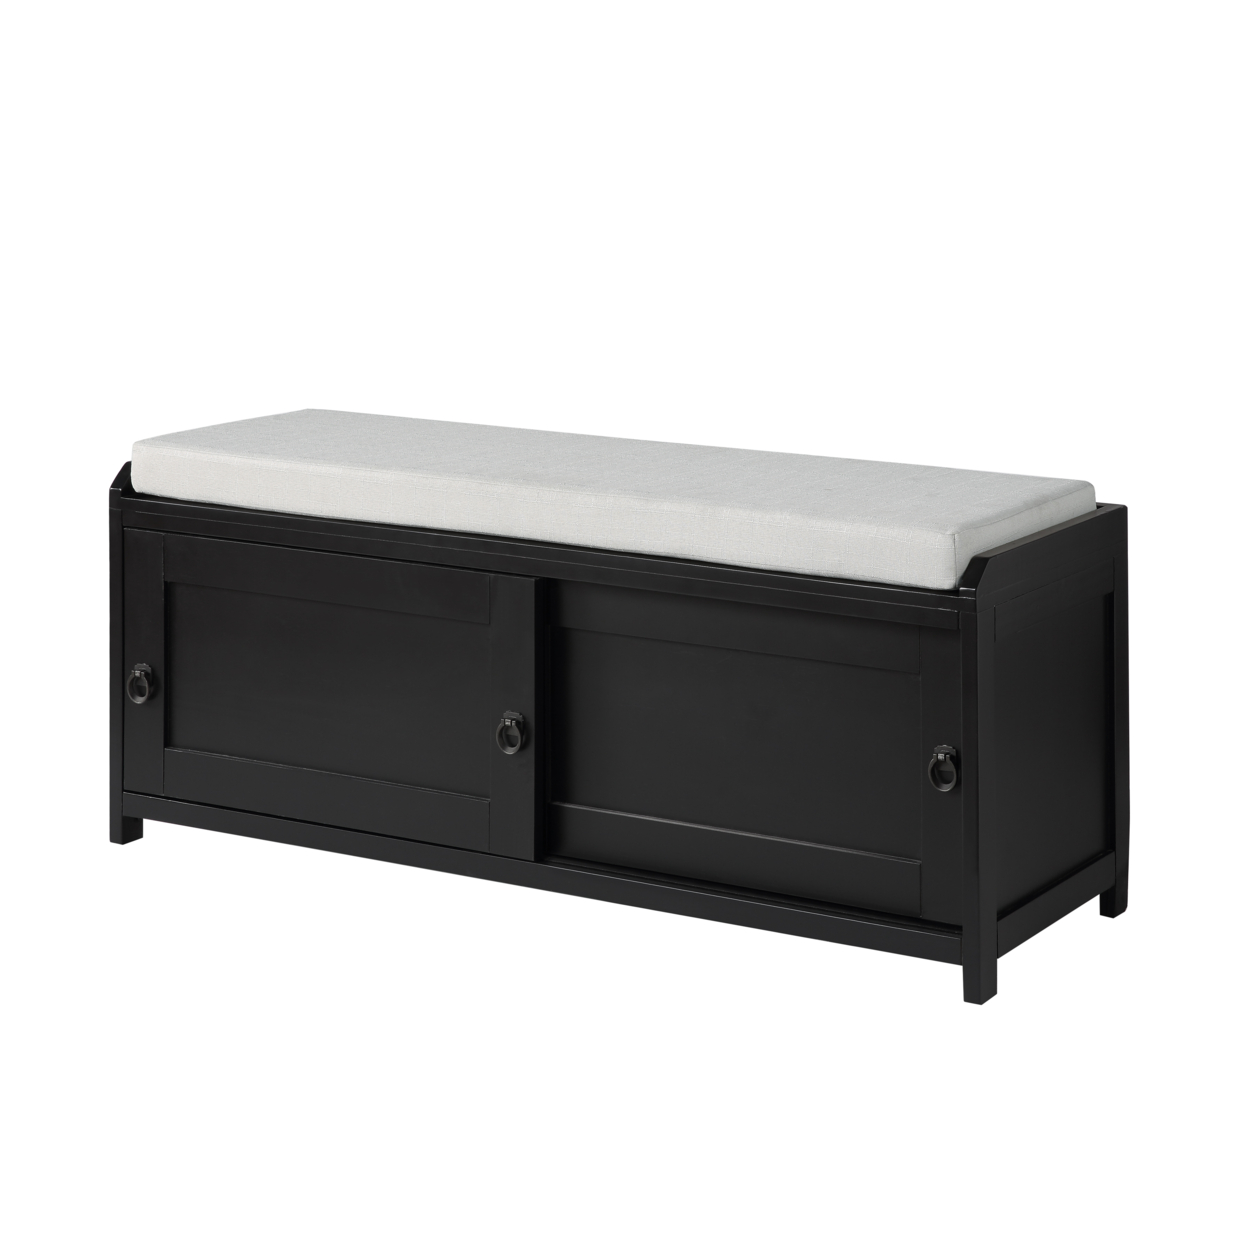 Bench with 2 Sliding Cabinets and Ring Pulls, Black, Saltoro Sherpi